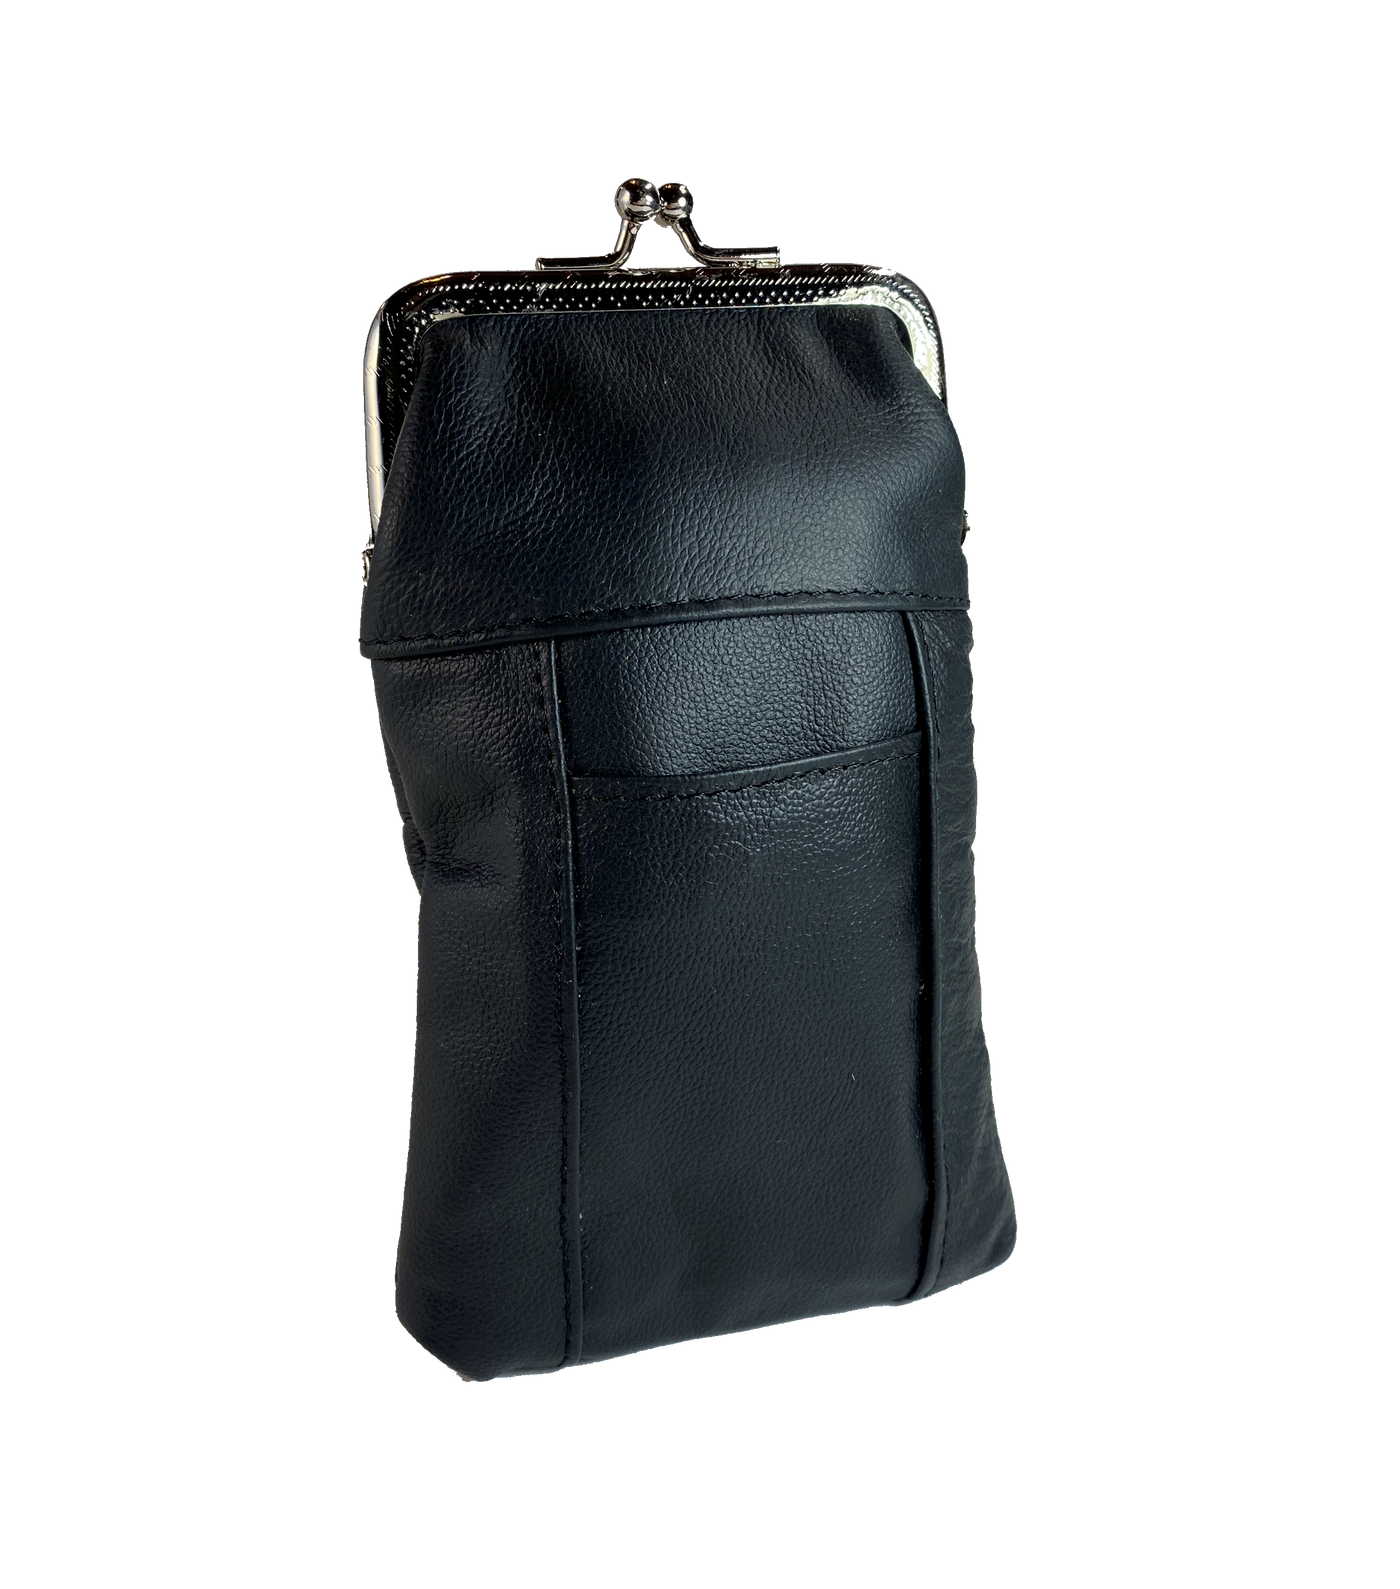 This is a versatile case it has a top pocket with clasp closure, plus a small slot for a bic style lighter pocket. Great for lots of stuff in a small compact case. Choose solid Black or Earth tones. Since we buy these assorted we will send whichever browns we have in stock.